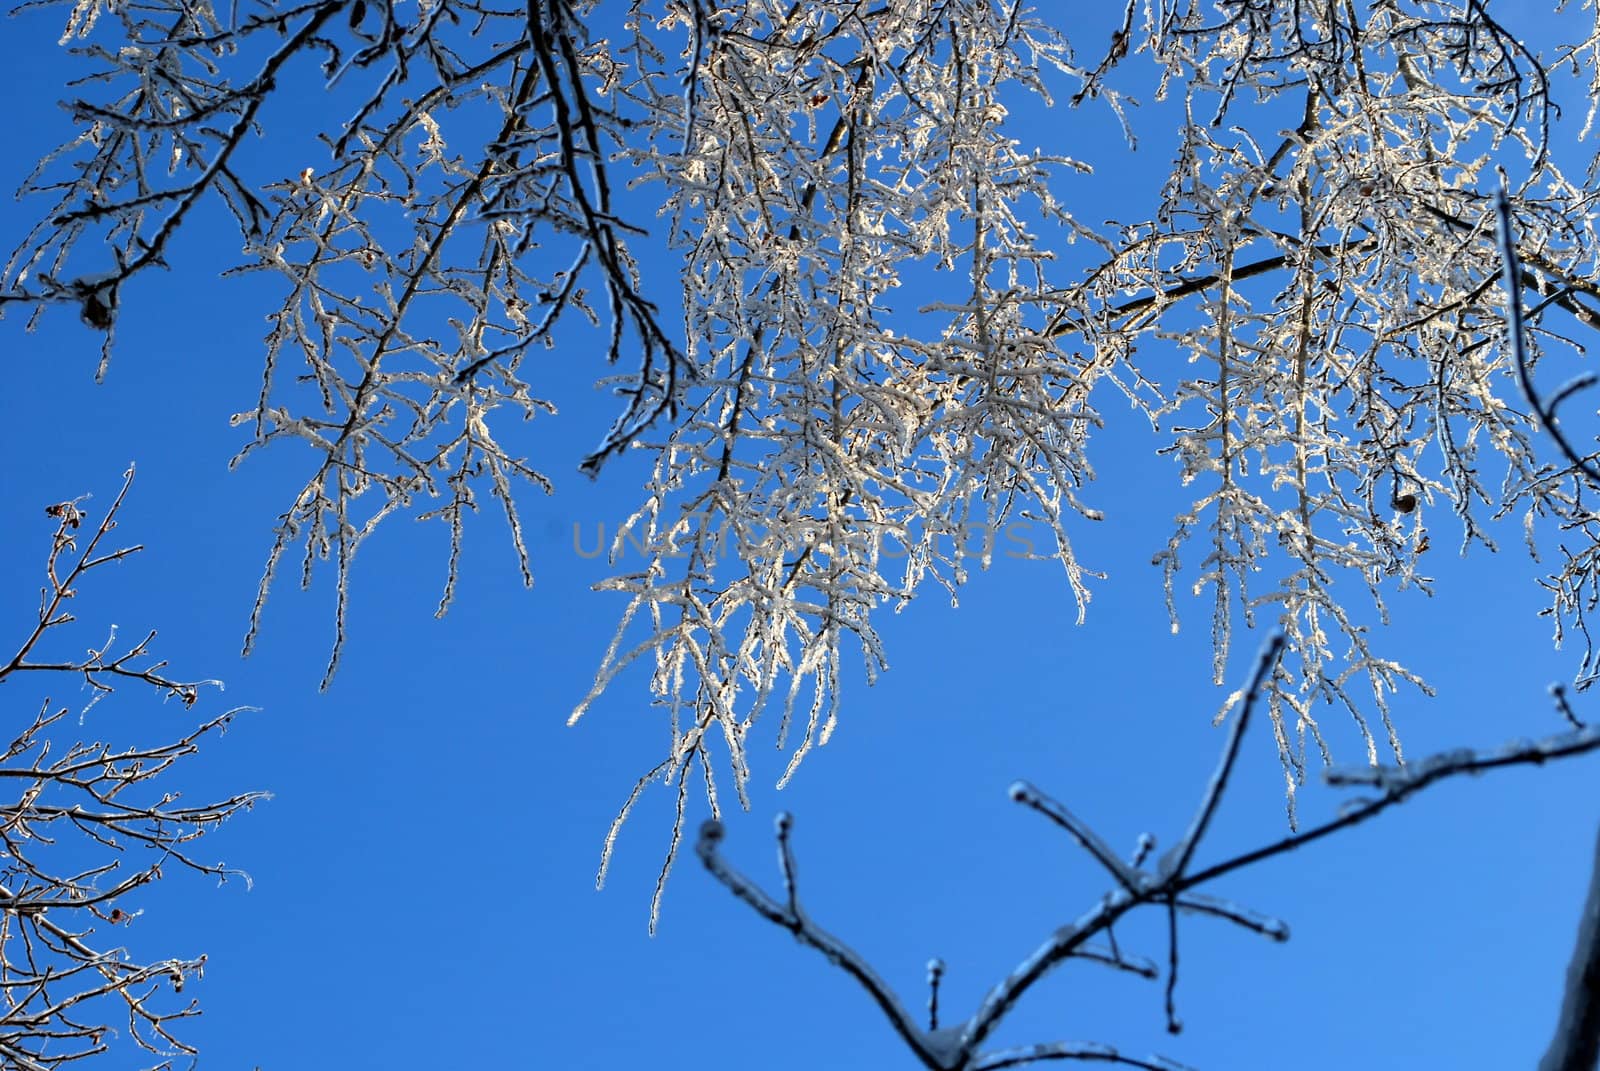 sun sparkled the tree branch in ice on a blue sky background 